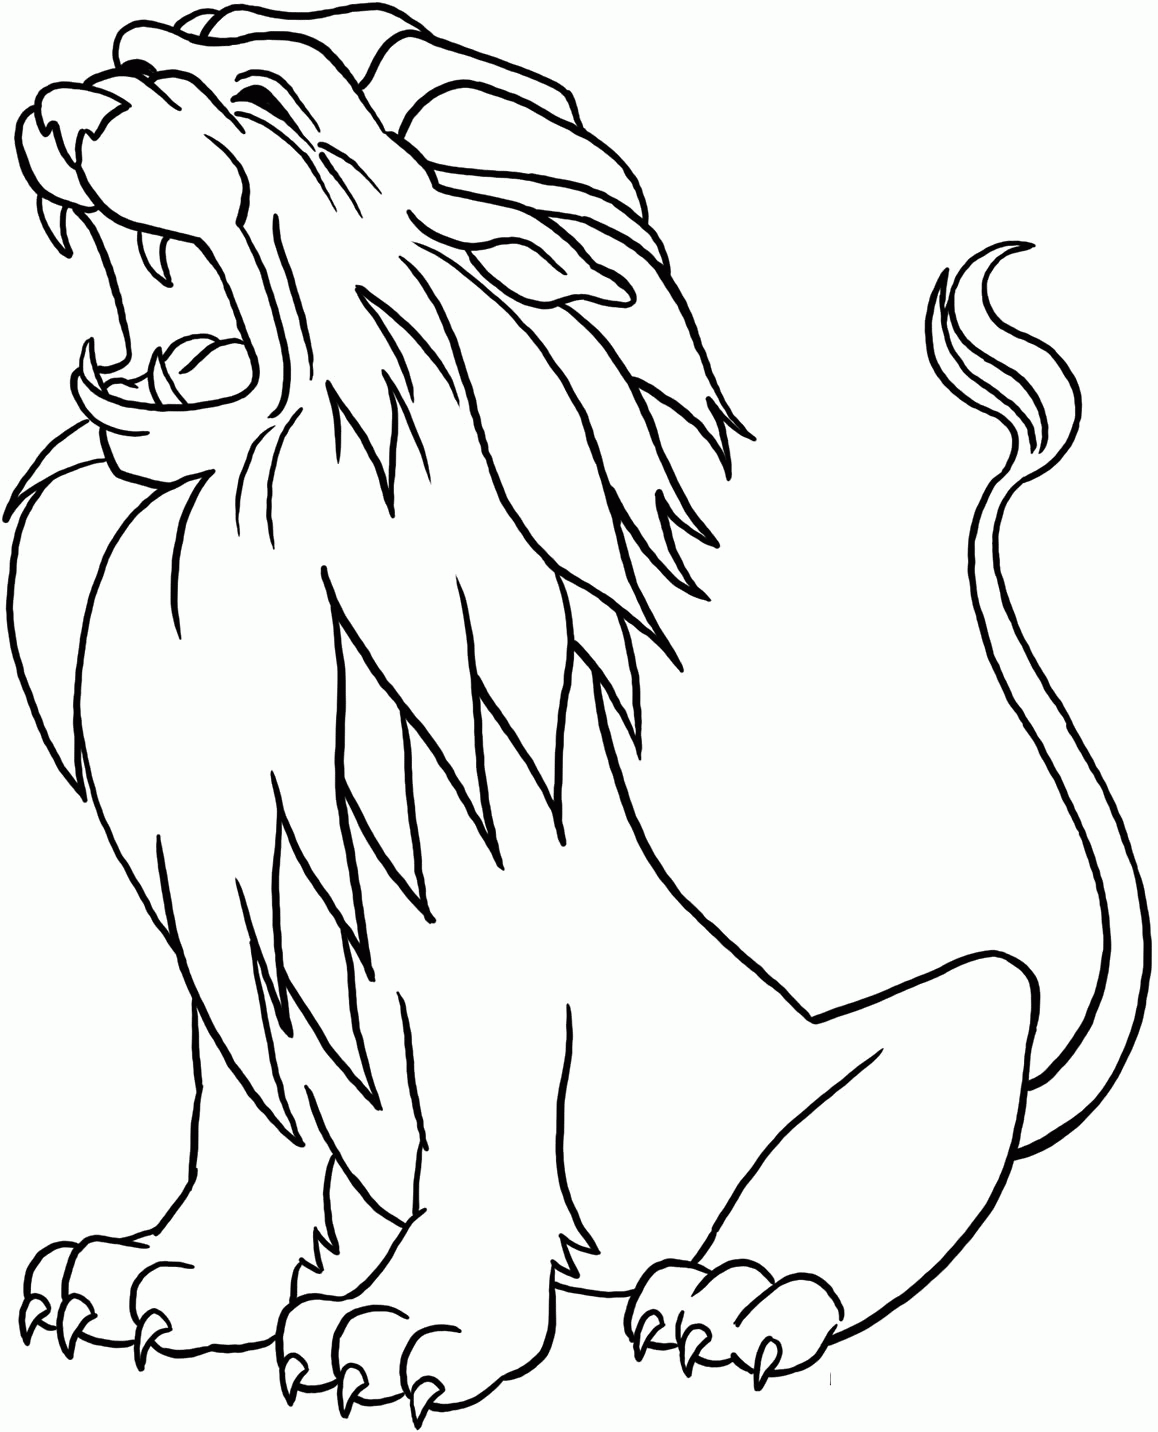 Lion Coloring Pages To Print